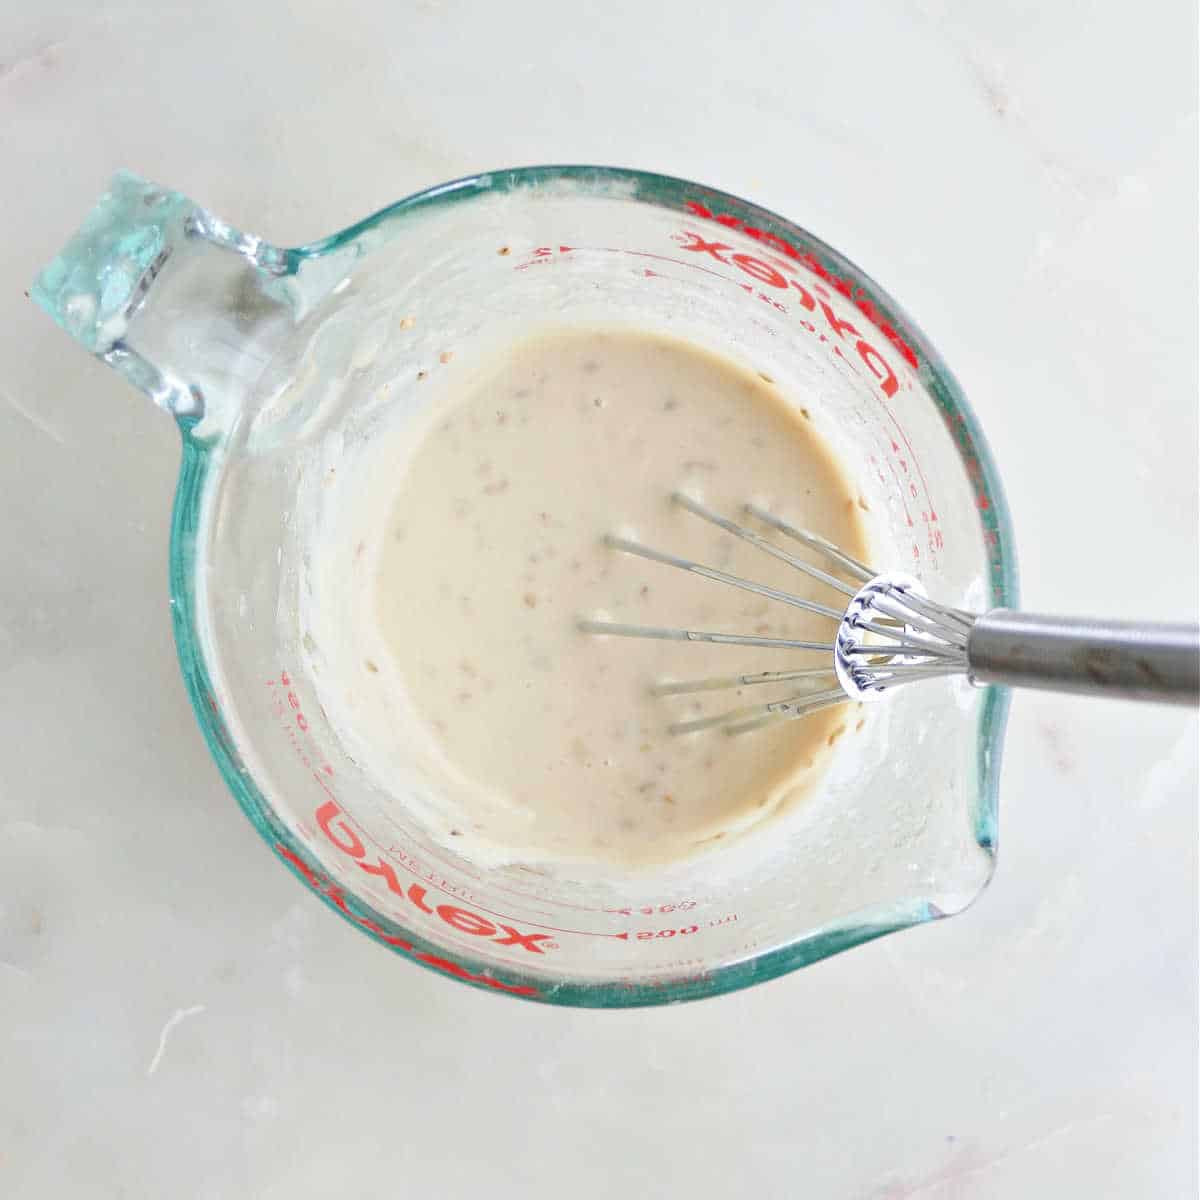 ingredients for lime and tahini dressing whisked together in a measuring cup